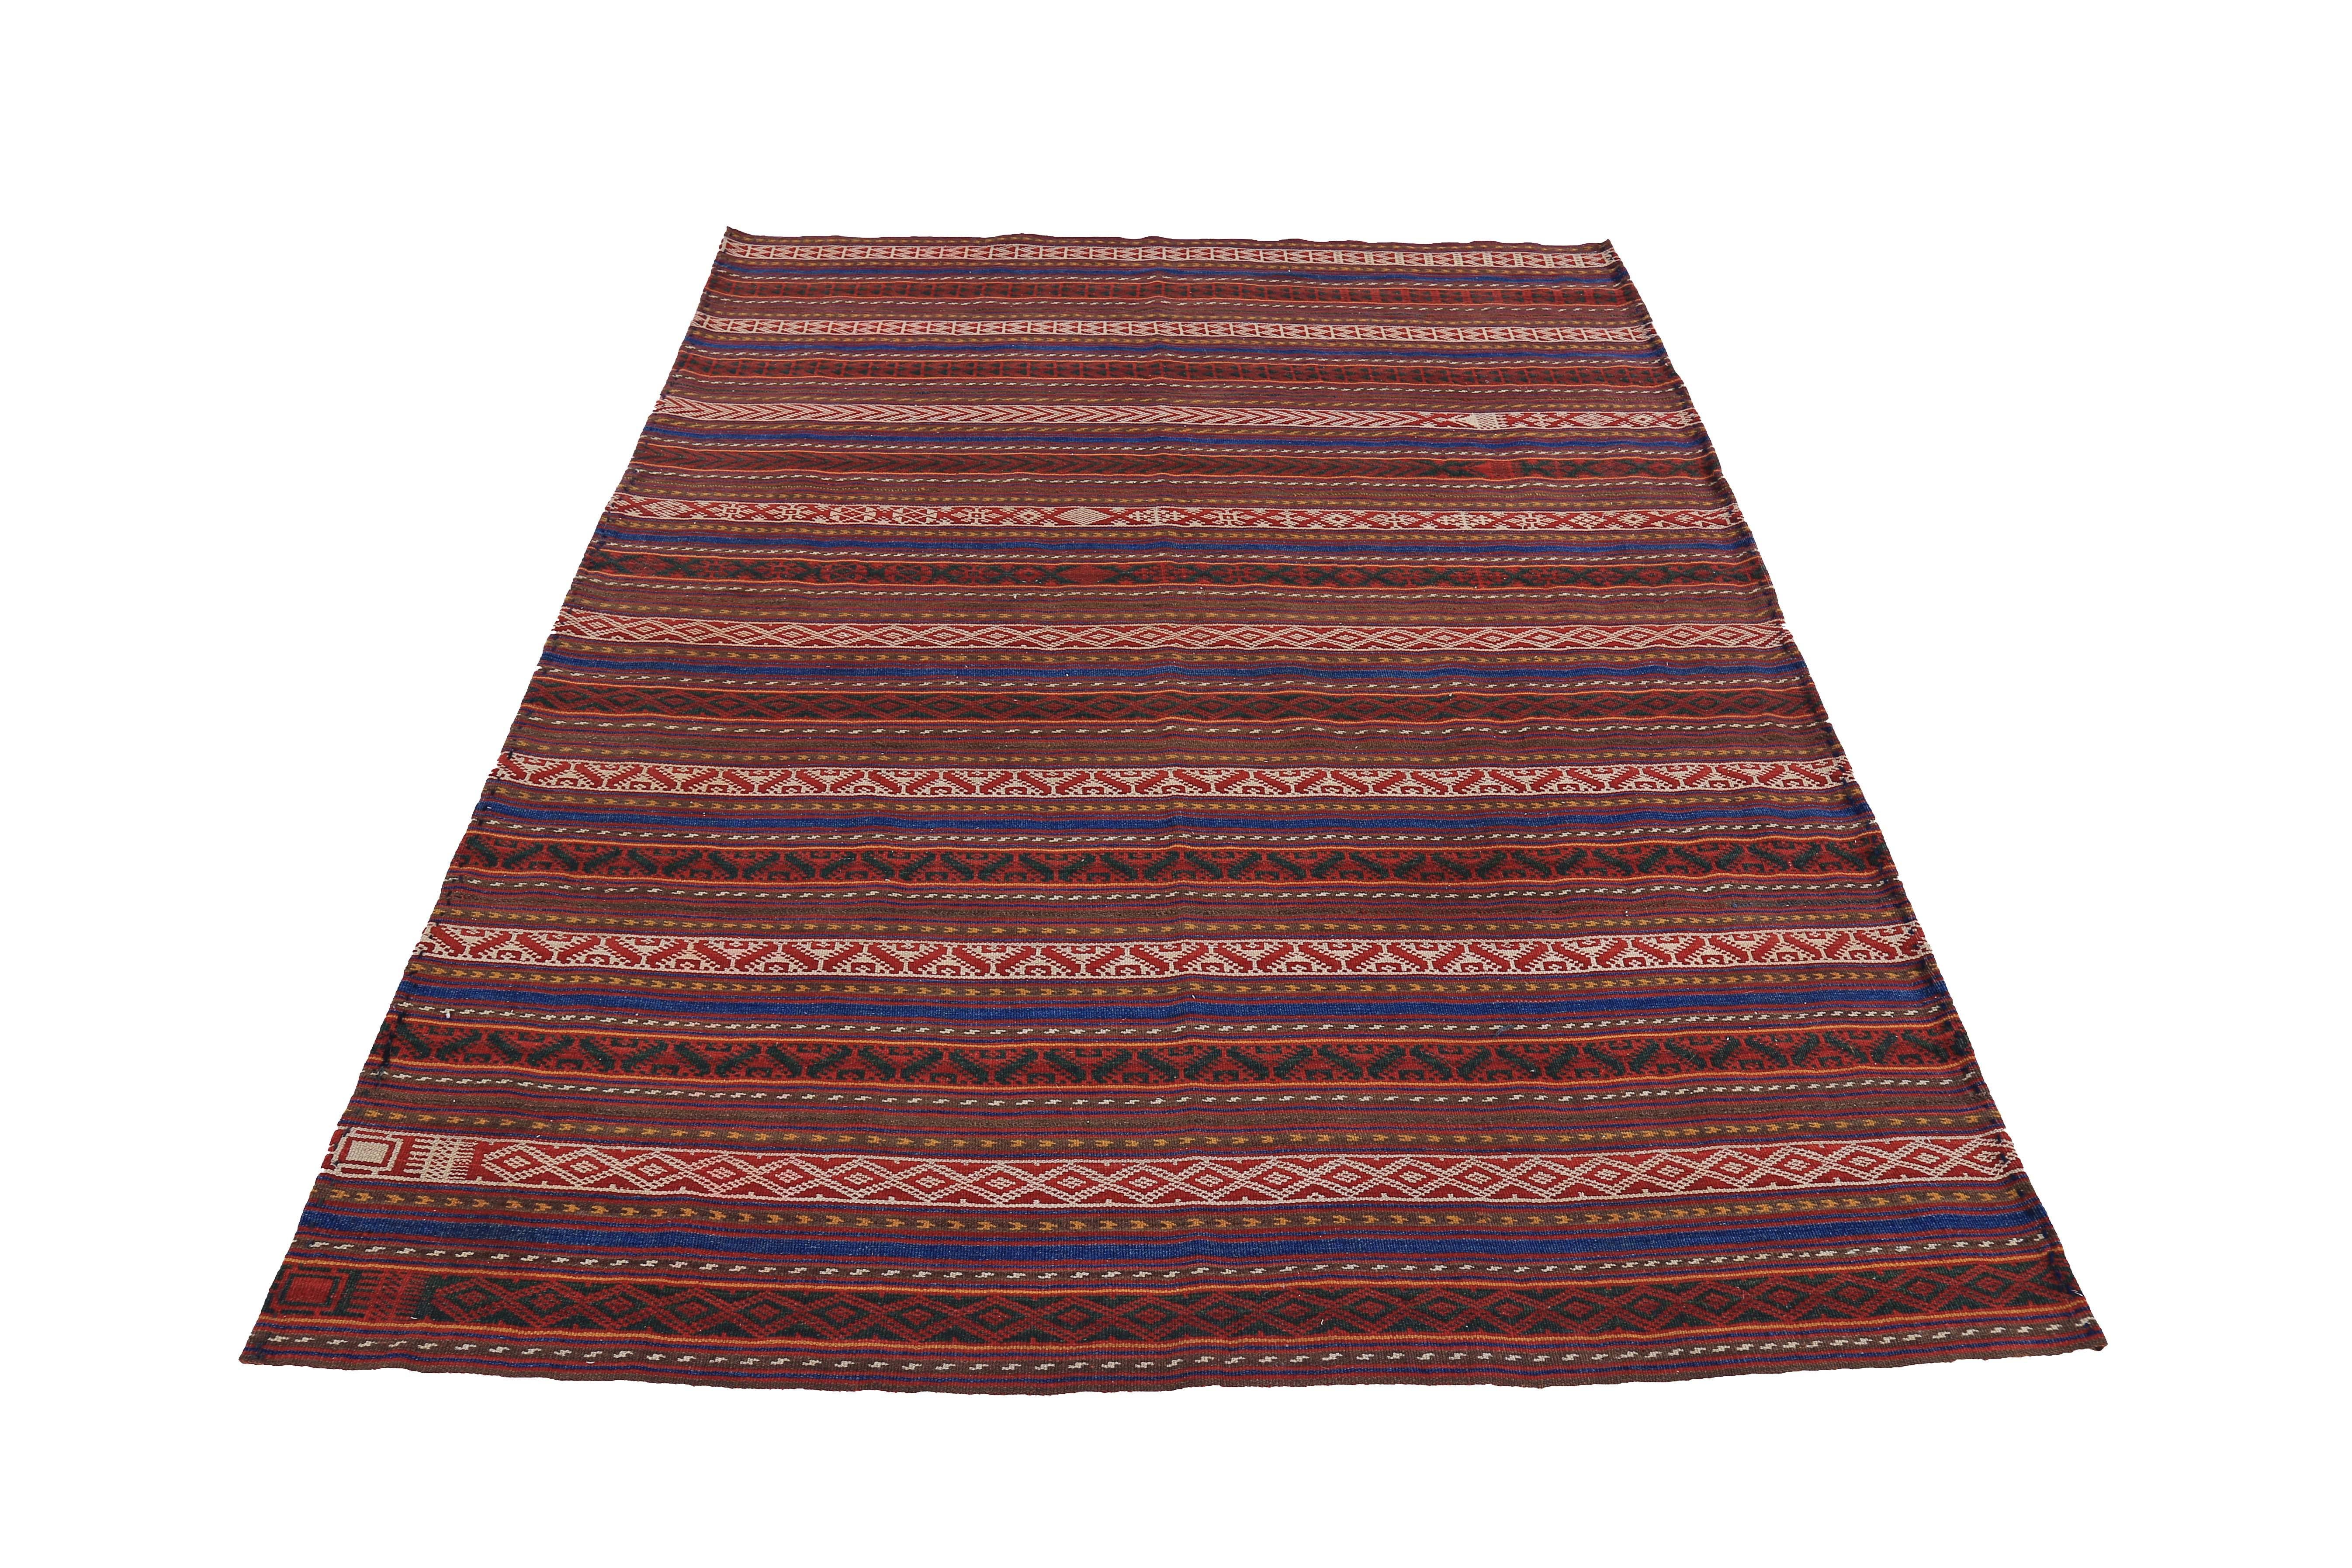 Turkish kilim rug handwoven from the finest sheep’s wool and colored with all-natural vegetable dyes that are safe for humans and pets. It’s a traditional Kilim flat-weave design featuring red, white and orange tribal stripes on a brown field. It’s